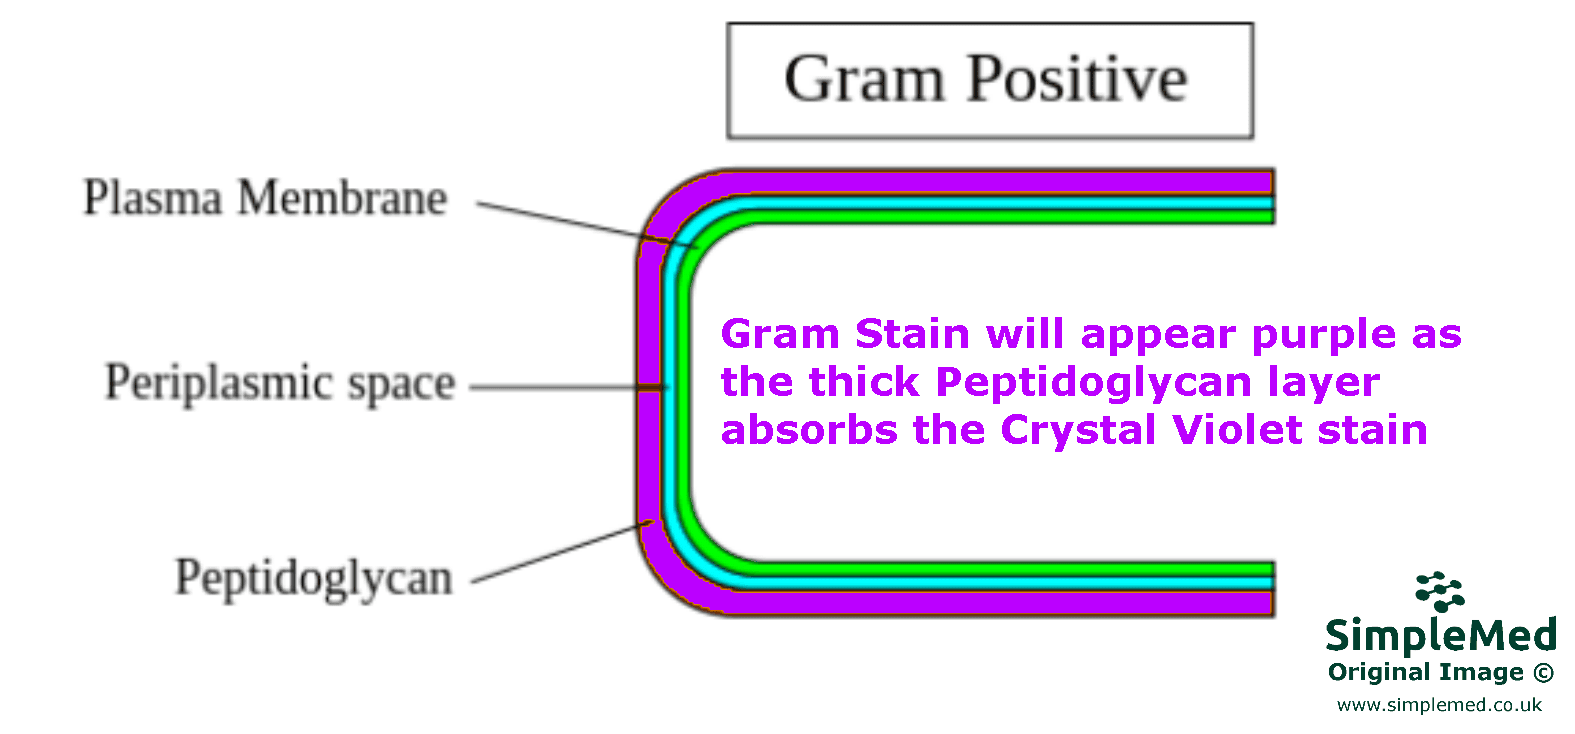 Gram Positive Bacterial Cell Wall SimpleMed